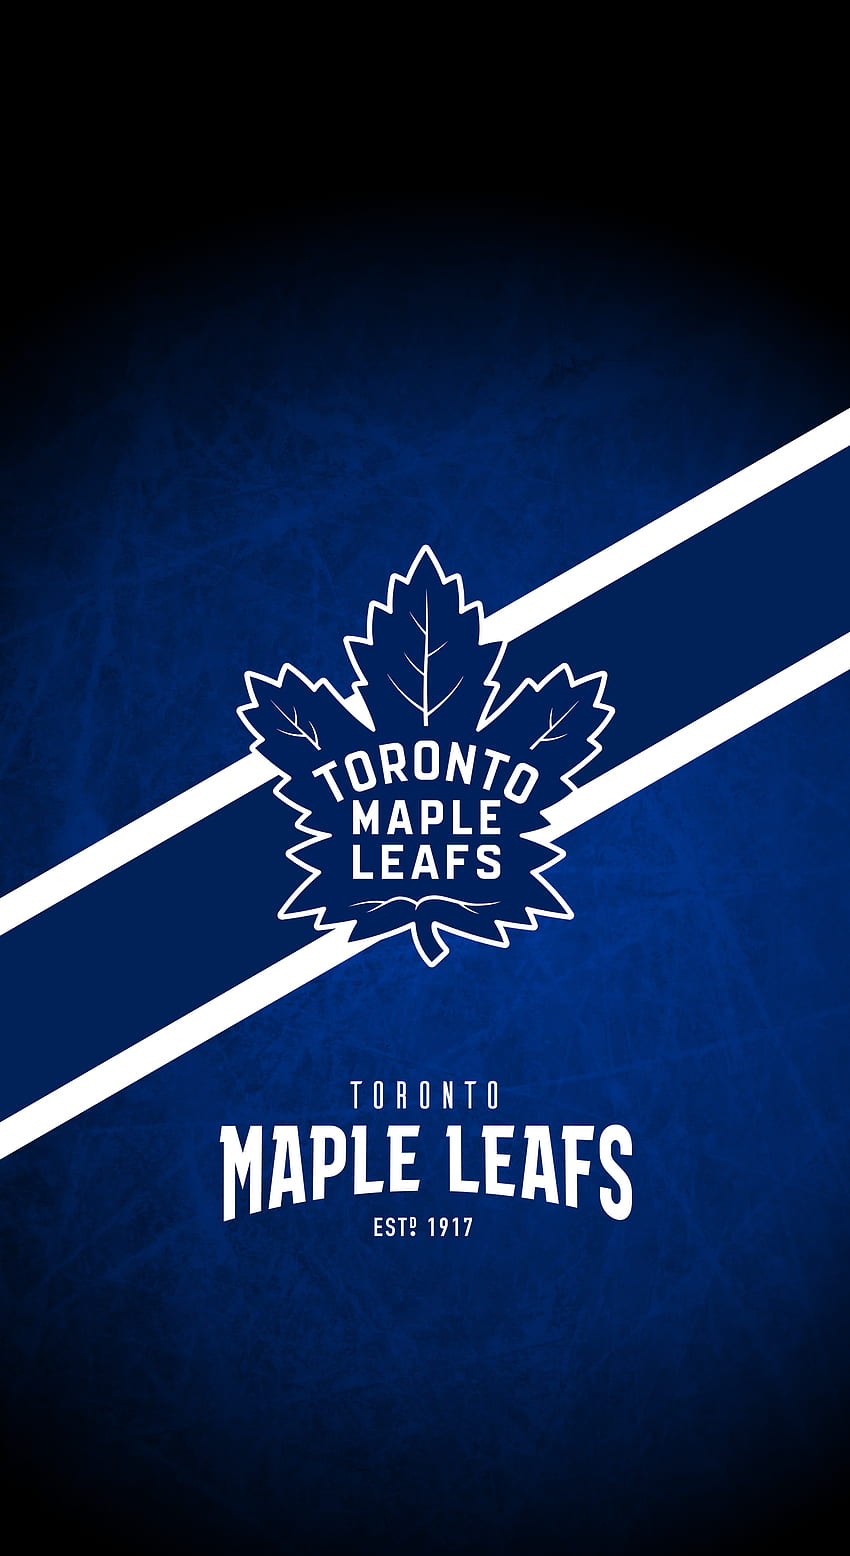 All Sizes. Toronto Maple Leafs (NHL) IPhone X XS XR Lock Screen - P. Toronto Maple Leafs, Toronto Maple Leafs , Maple Leafs, Edmonton Oilers HD phone wallpaper